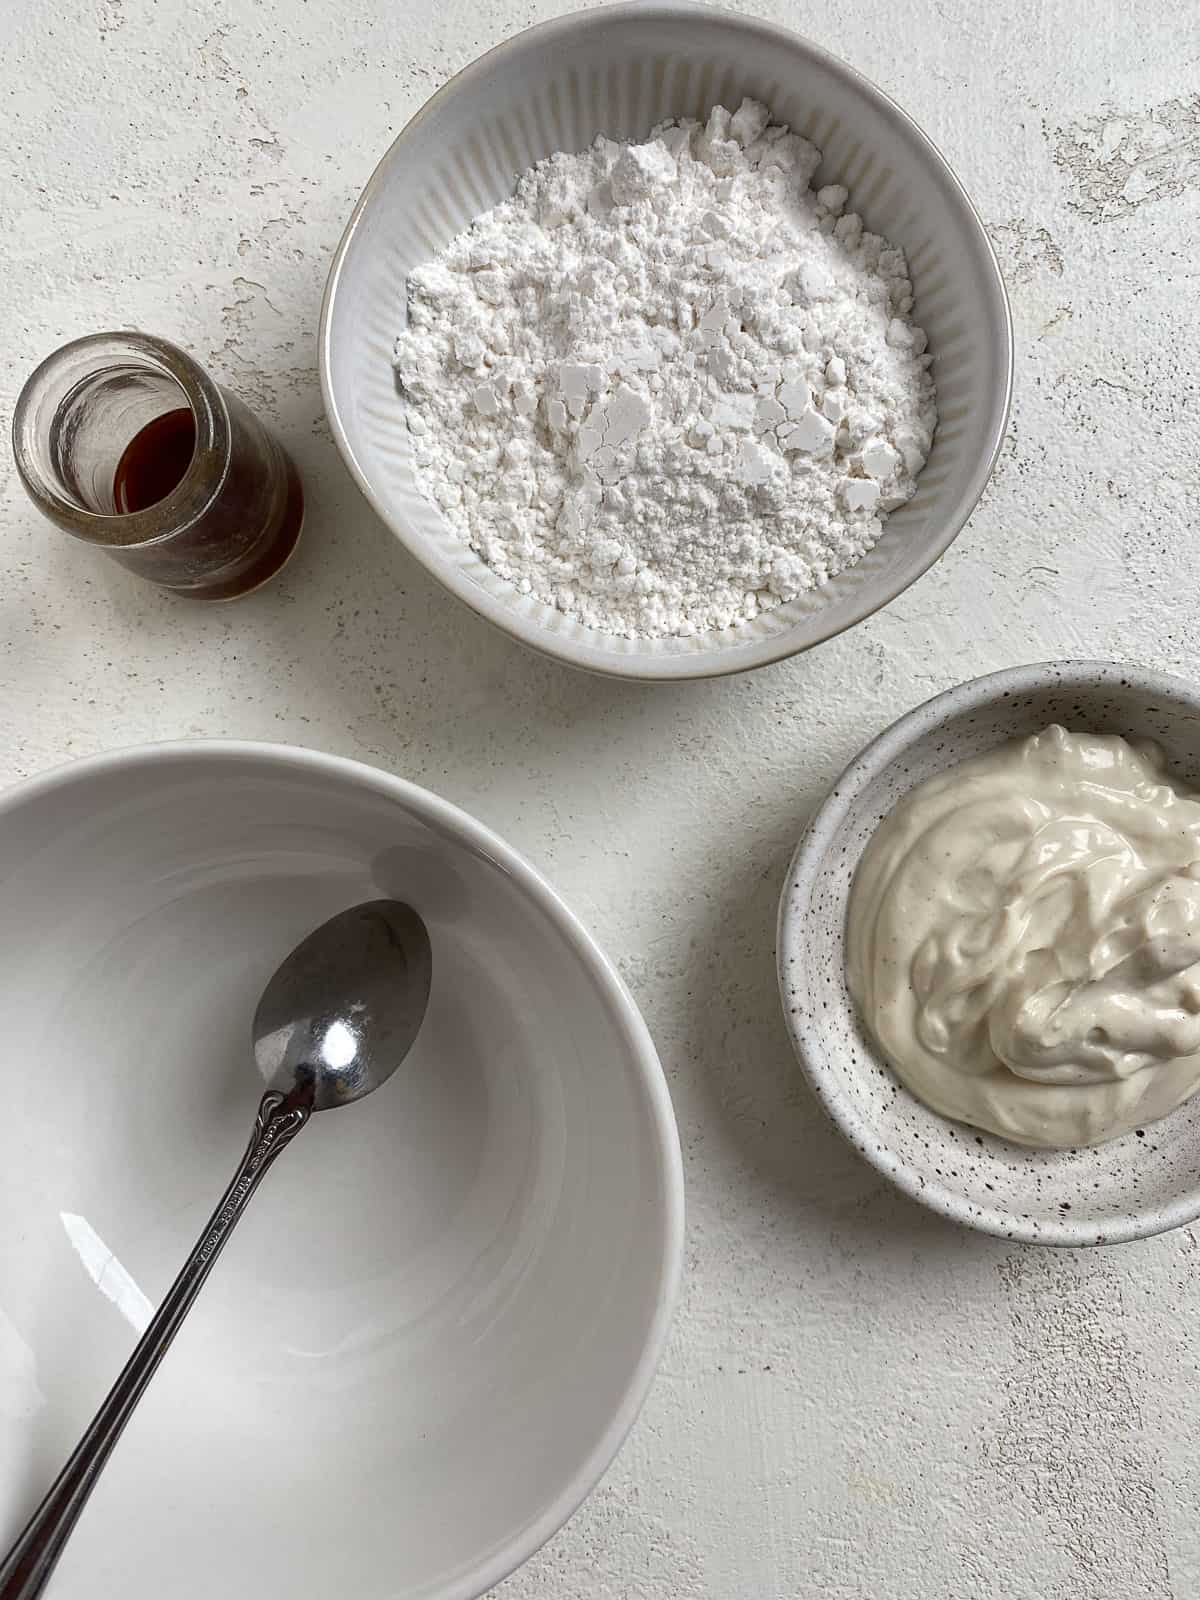 ingredients for cinnamon dough glaze against a white surface